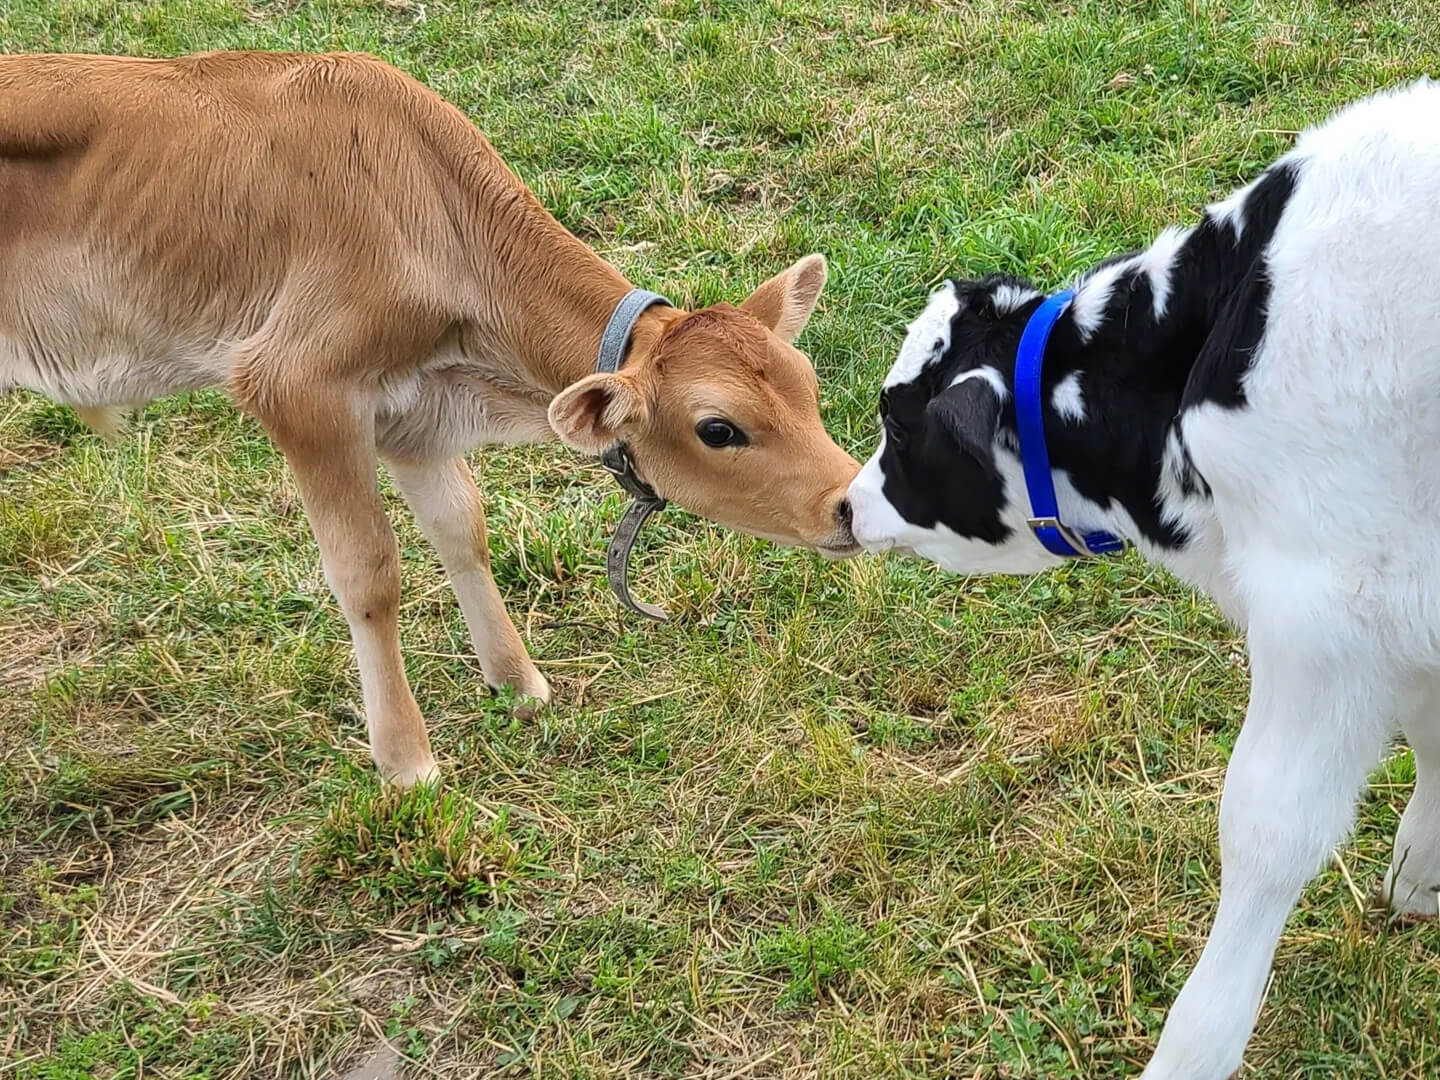 Two calves standing in the grass, touching noses